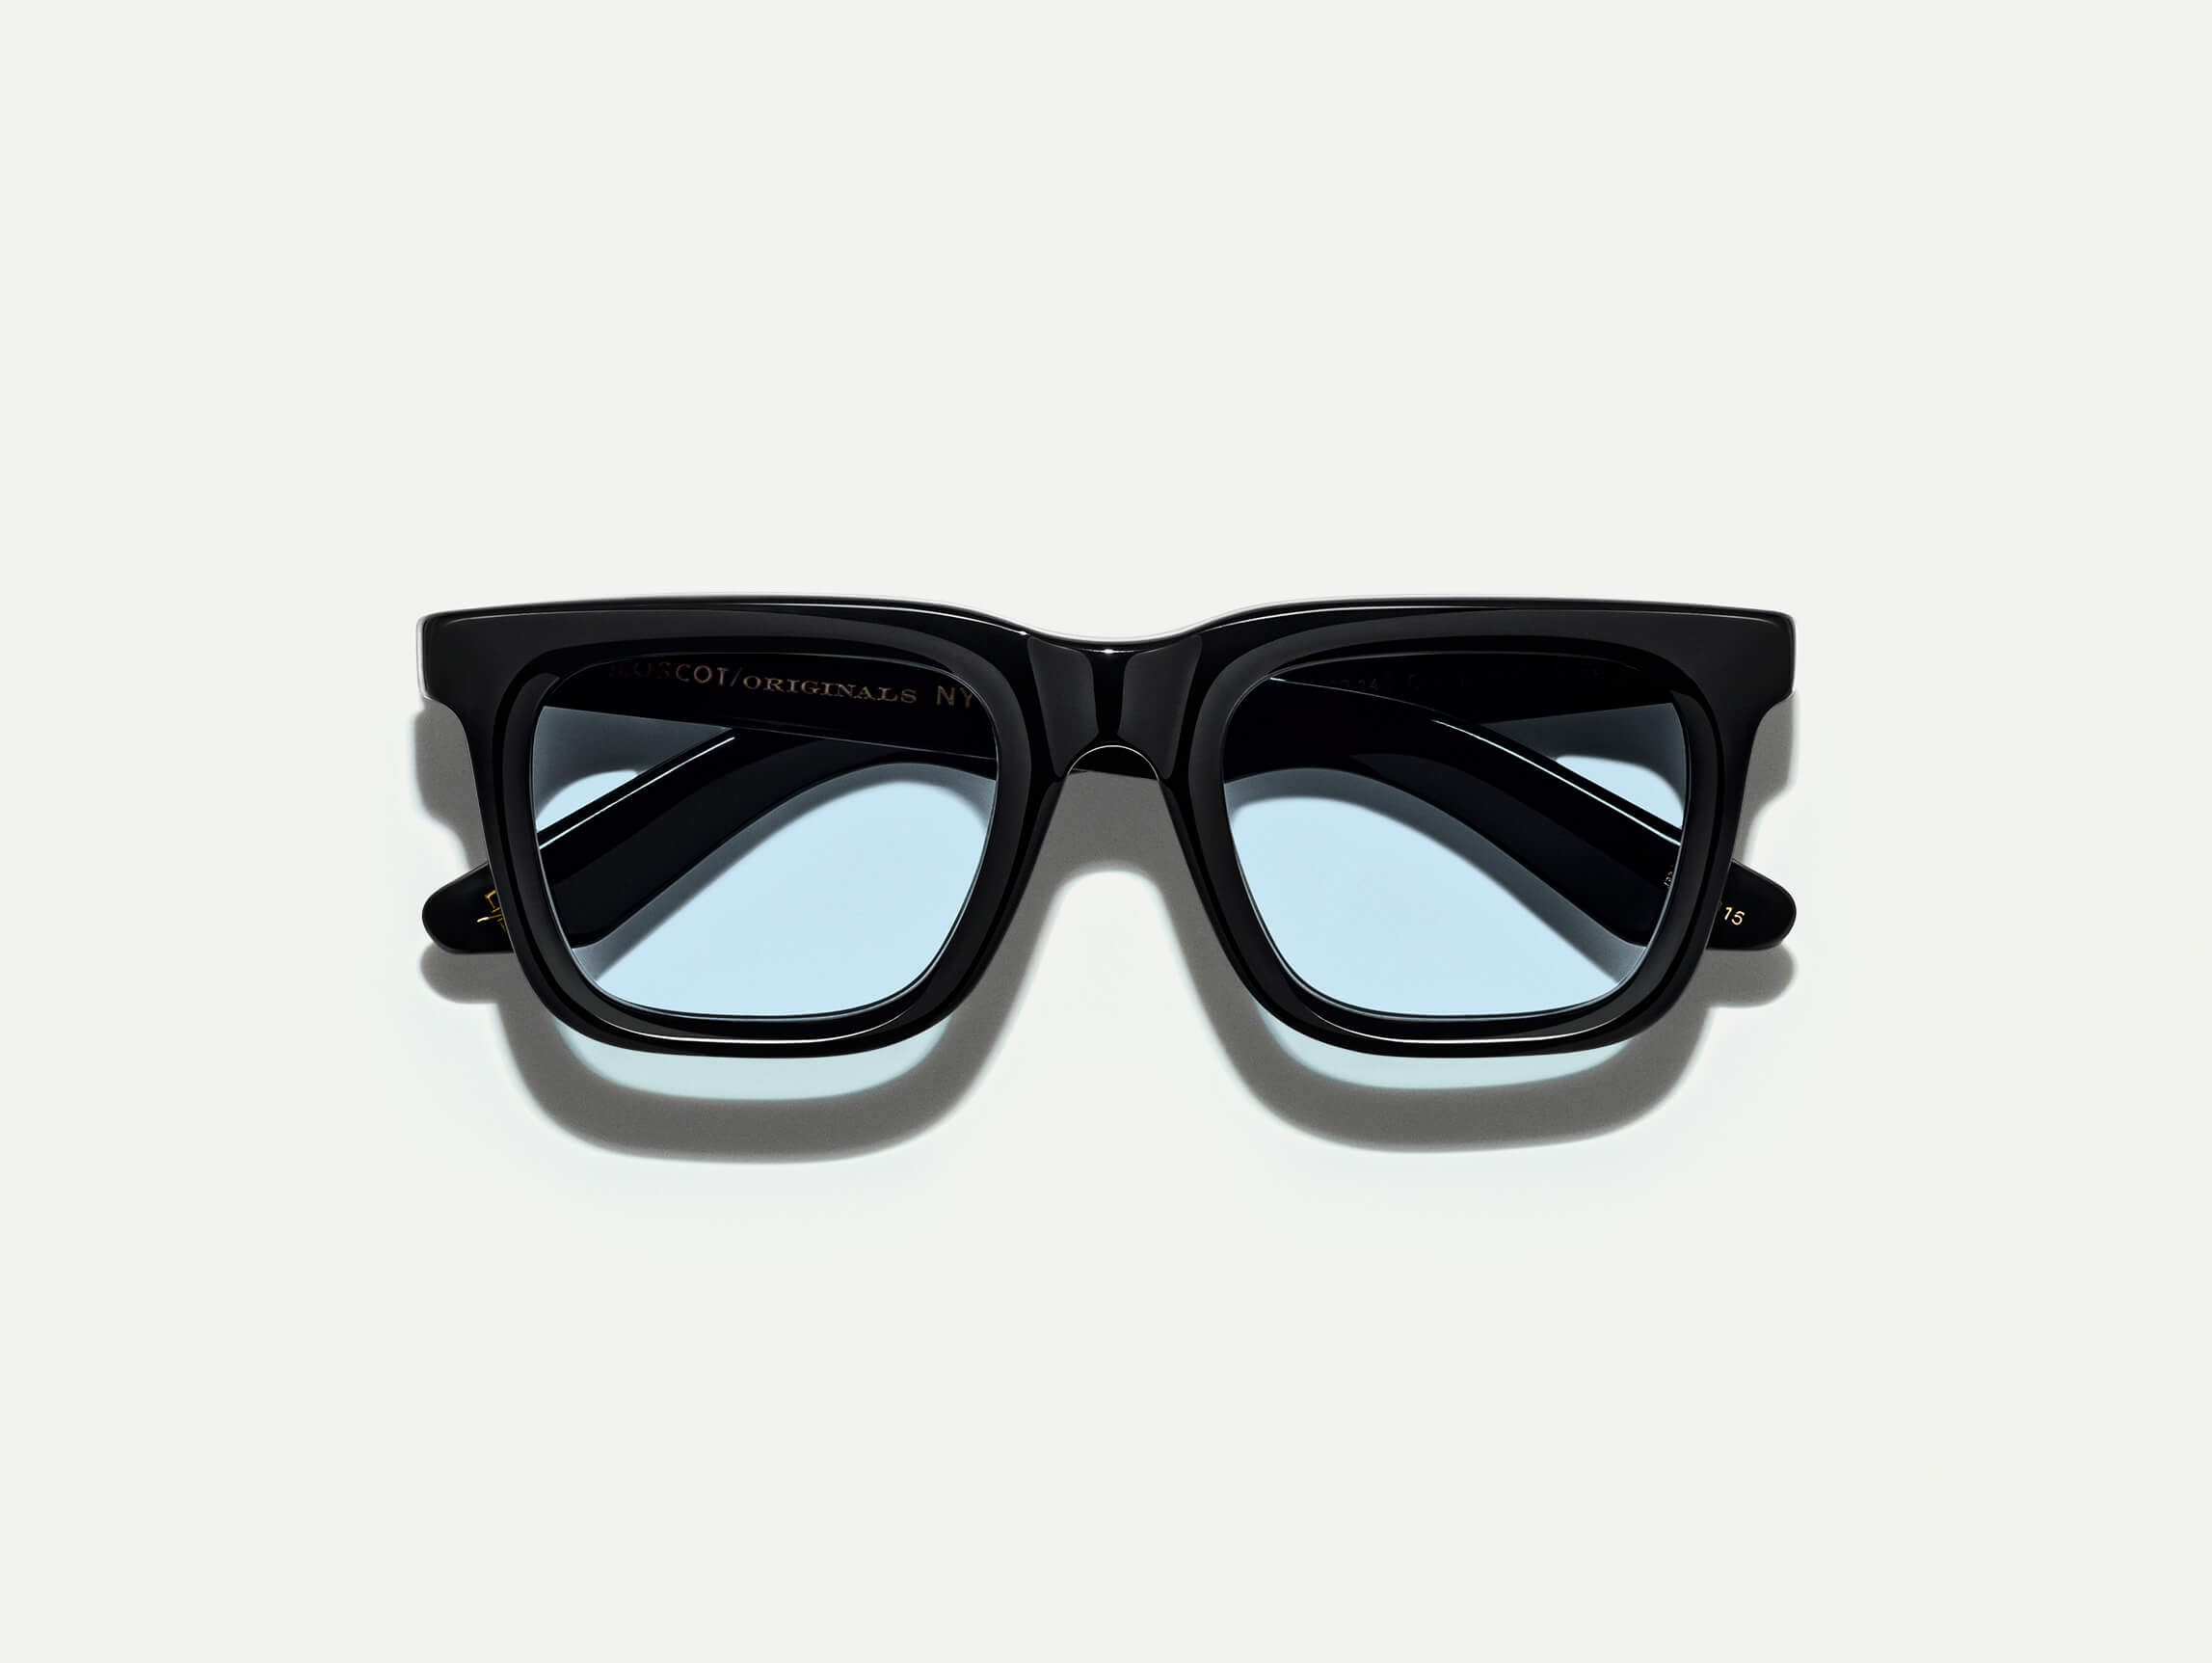 The RIZIK Black with Bel Air Blue Tinted Lenses